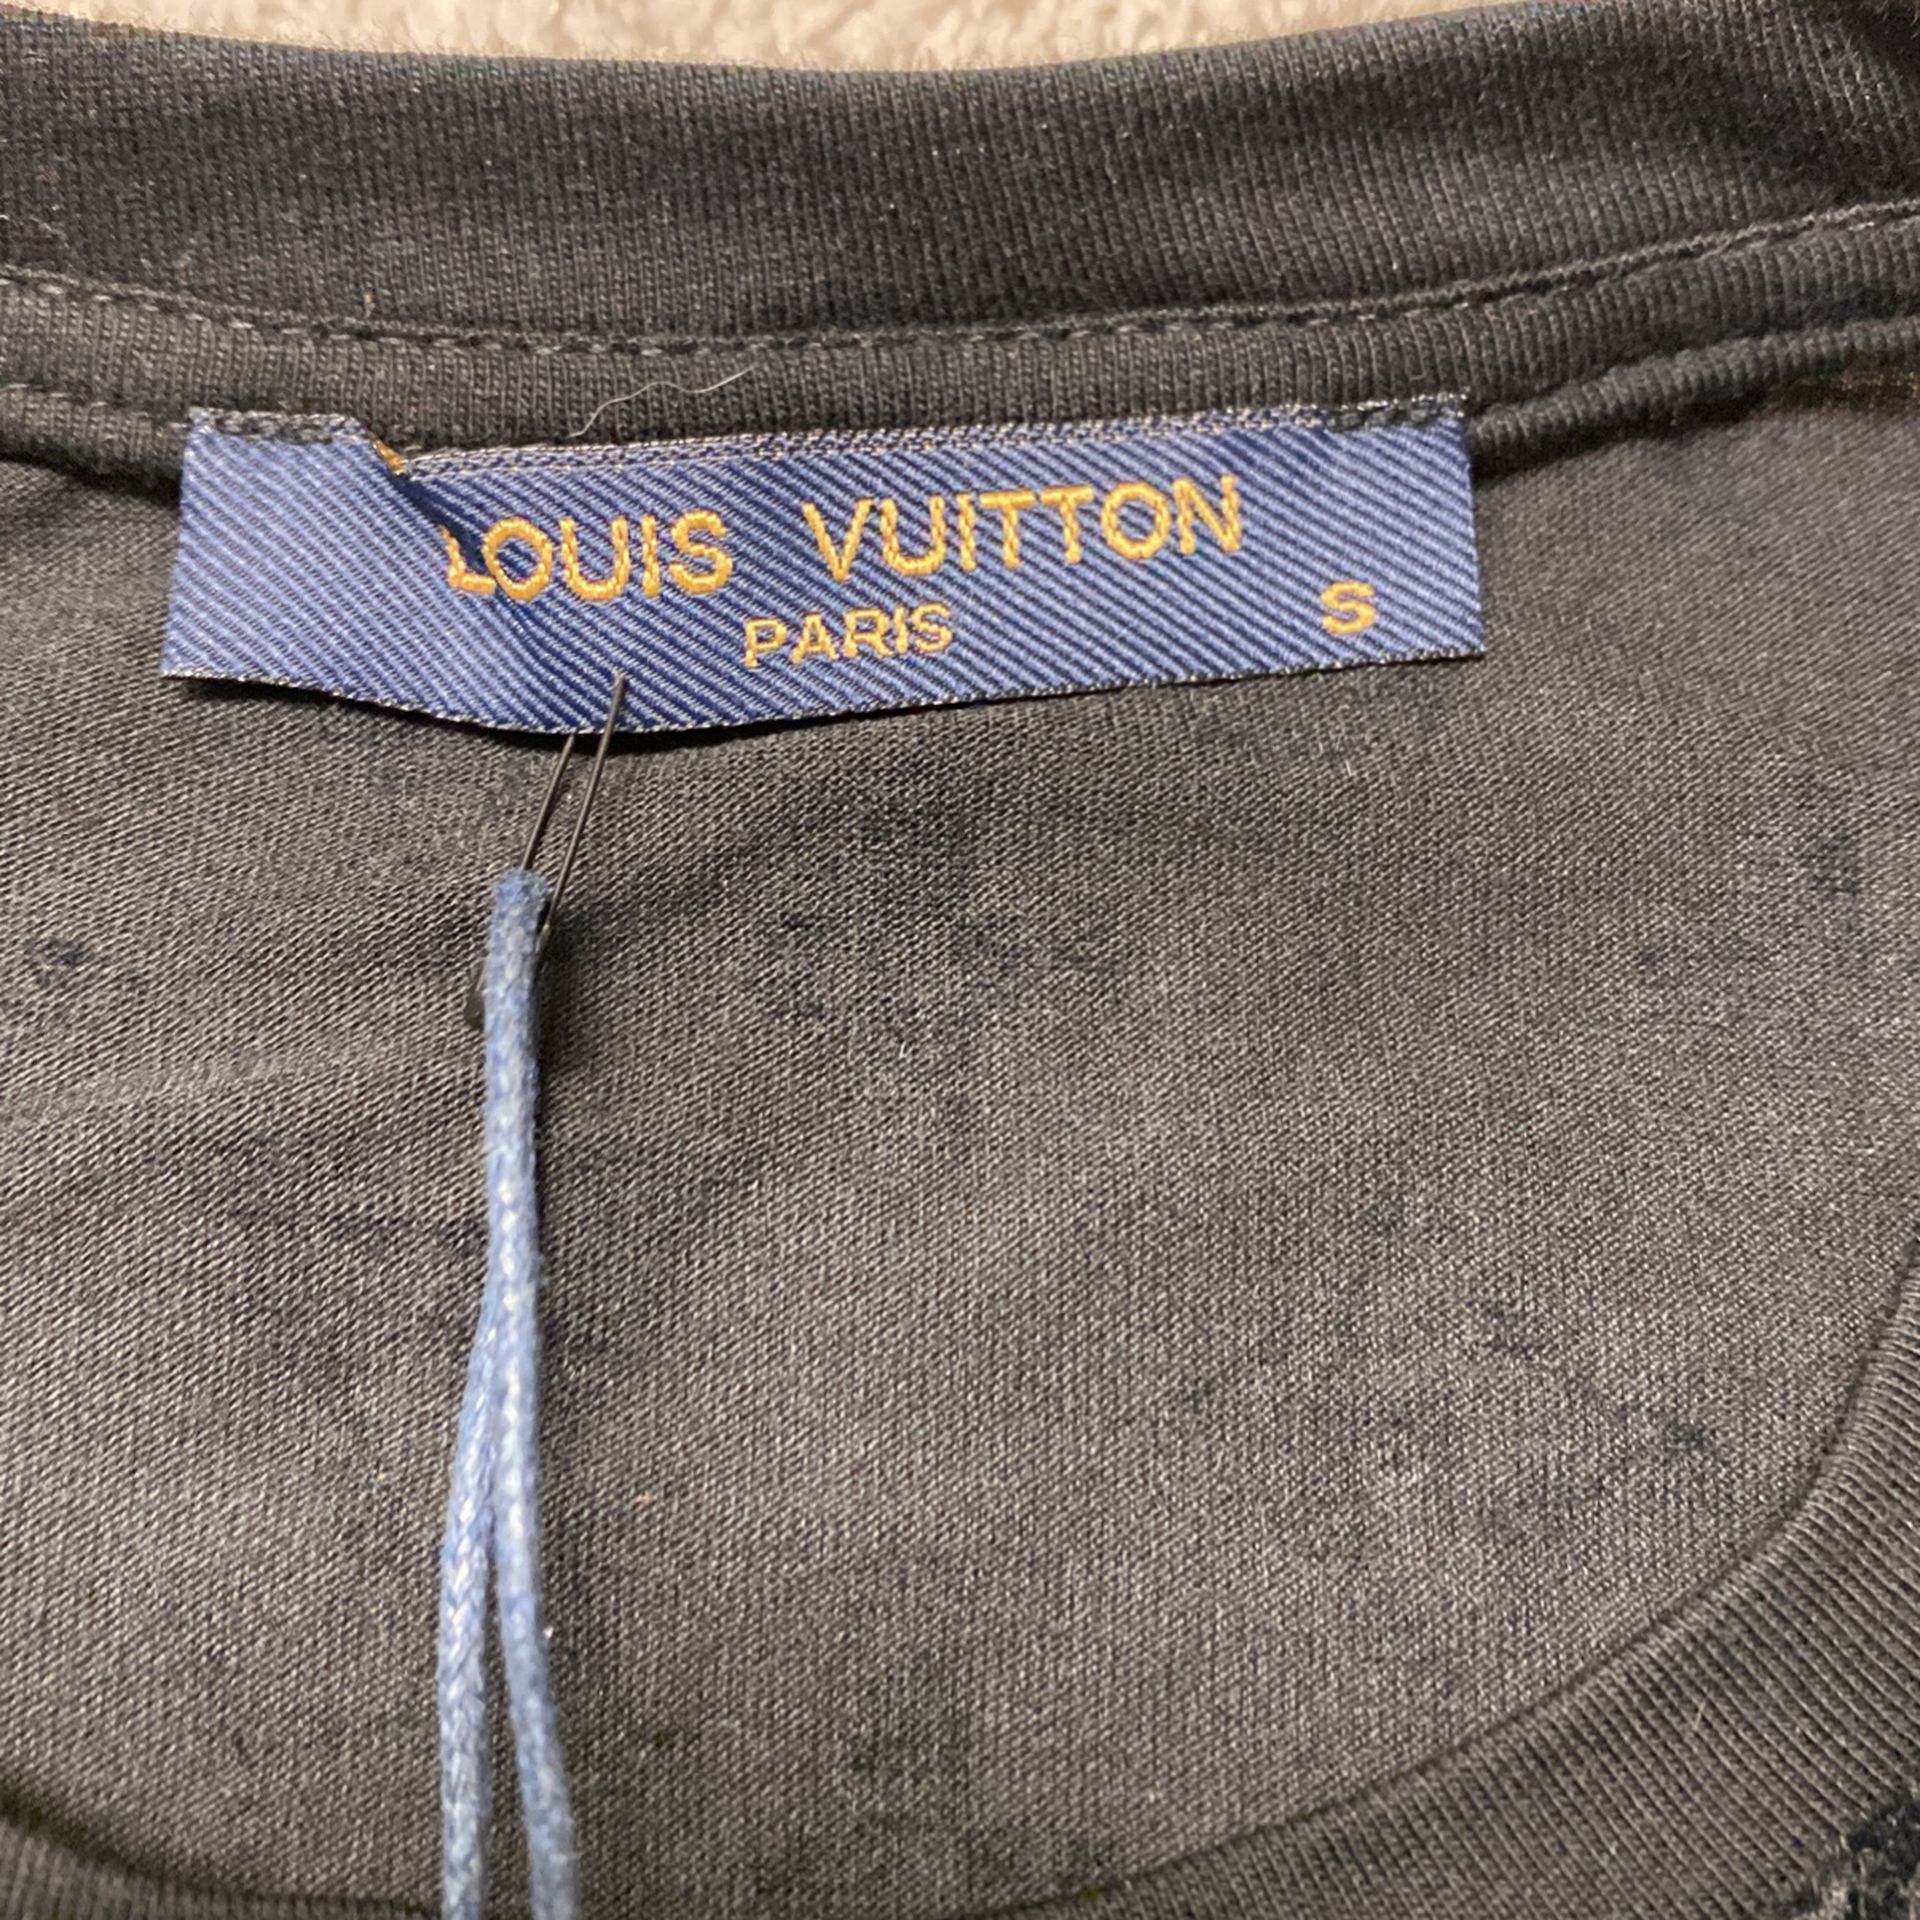 Black Louis Vuitton Tee LV T Shirt for Sale in Salem, MA - OfferUp